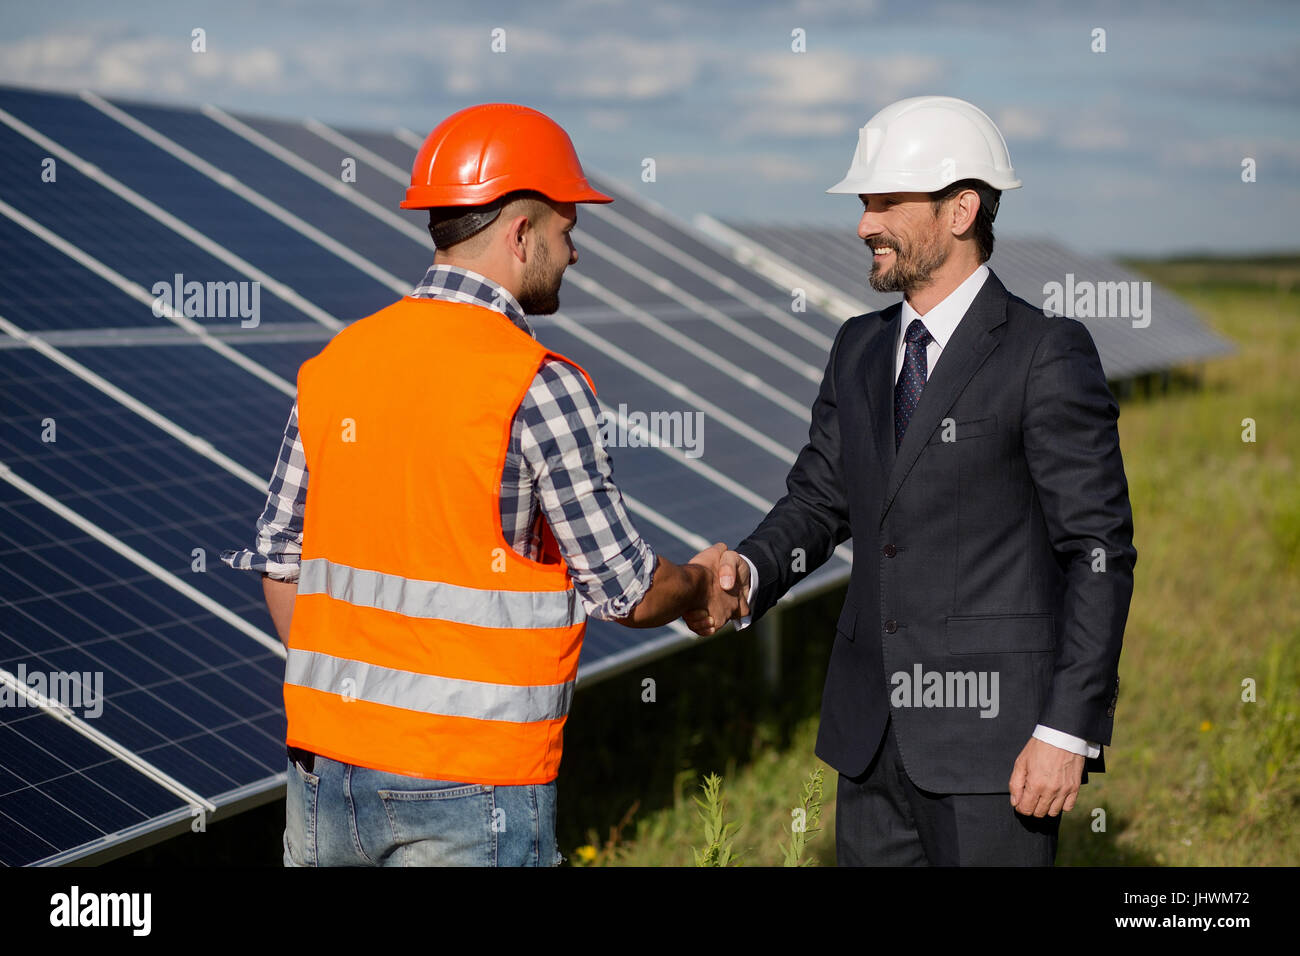 Businessman and foreman shaking hands at solar energy station. Stock Photo